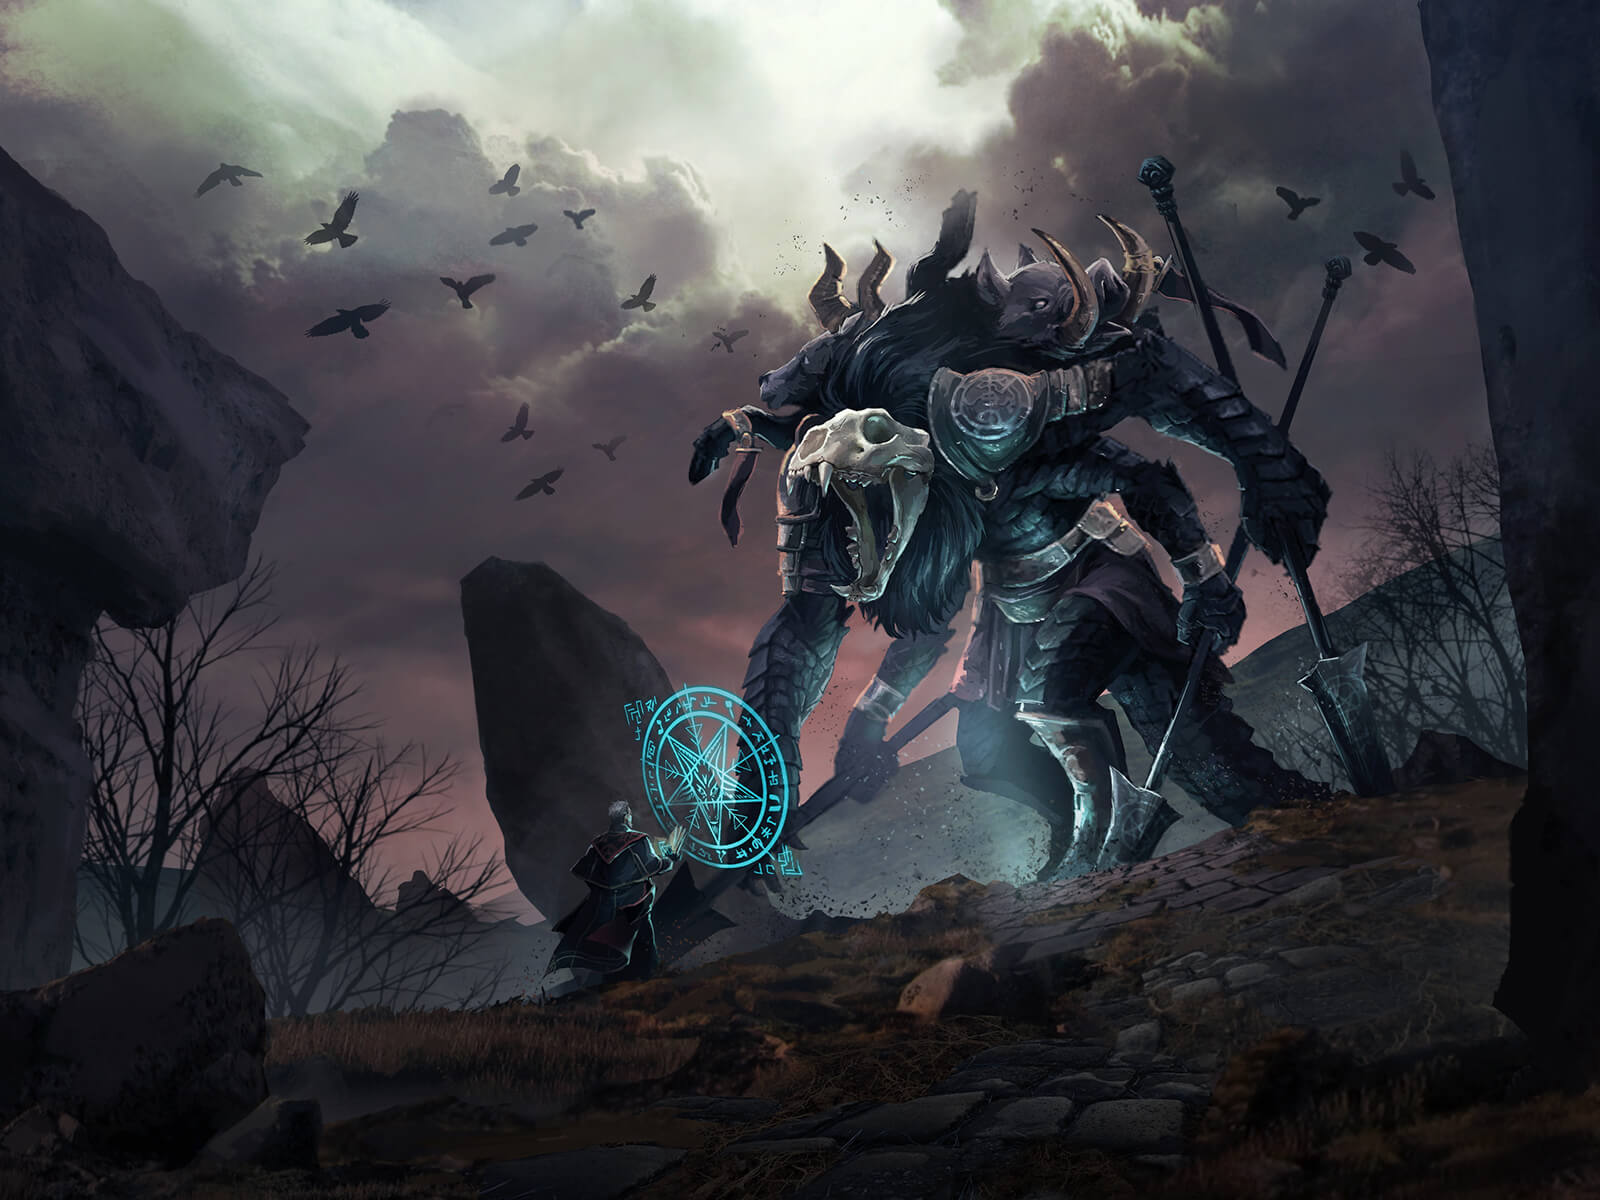 In a dark, desolate area, a man casts a glowing blue rune in front of a tall, roaring beast carrying large spears.